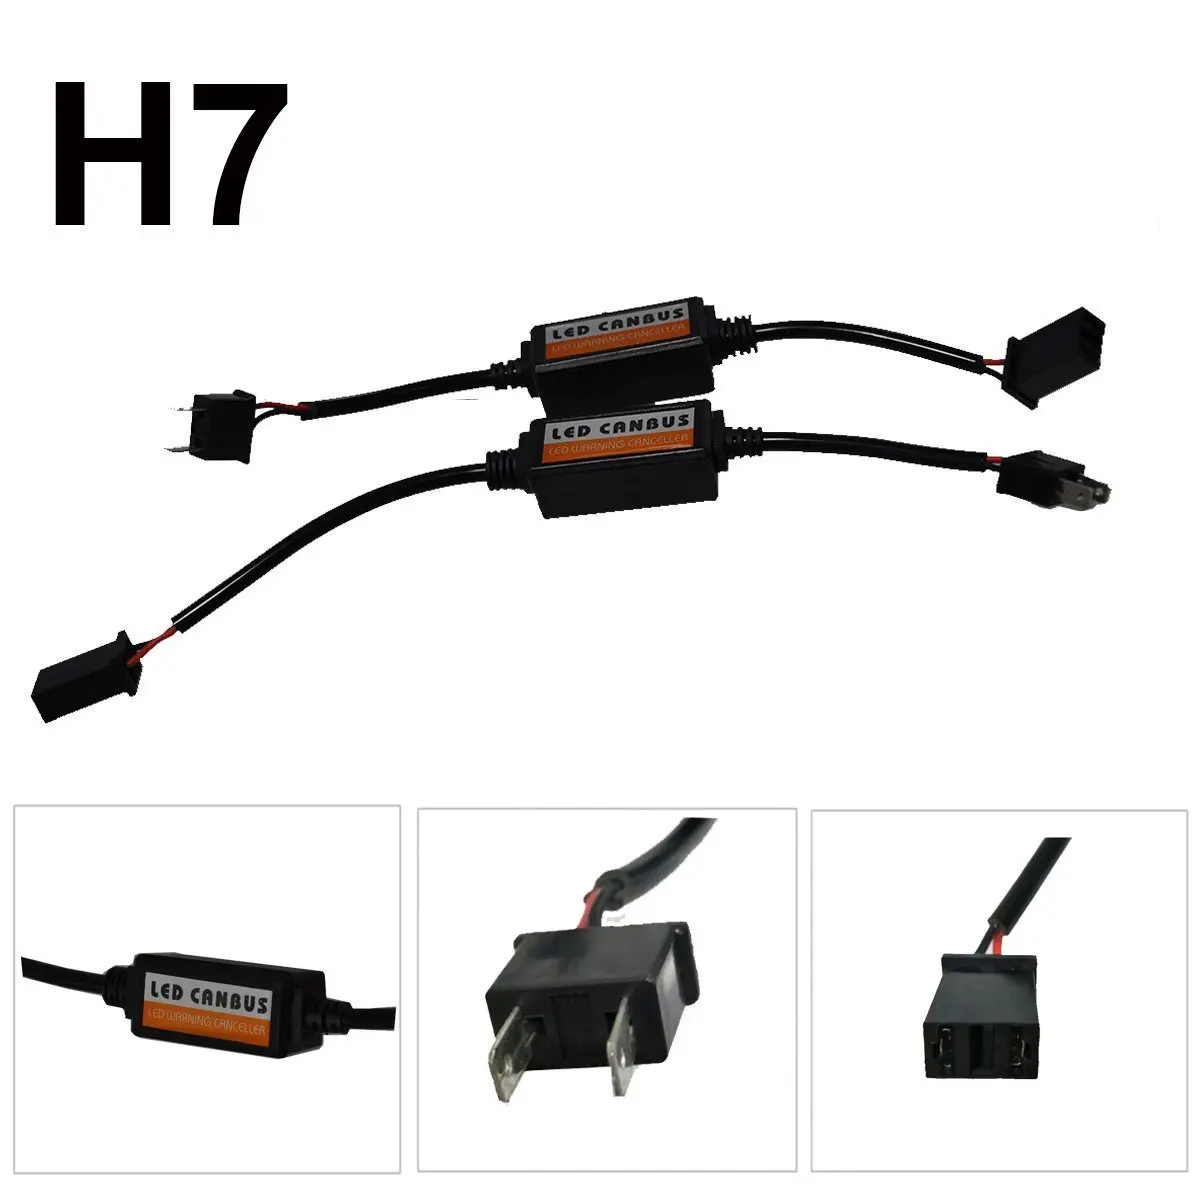 

1 Pair H7 LED Canbus Wiring Decoder LED Resistor Canbus Error Free Decoder Warning Anti Flicker Canceller For Car Headlights